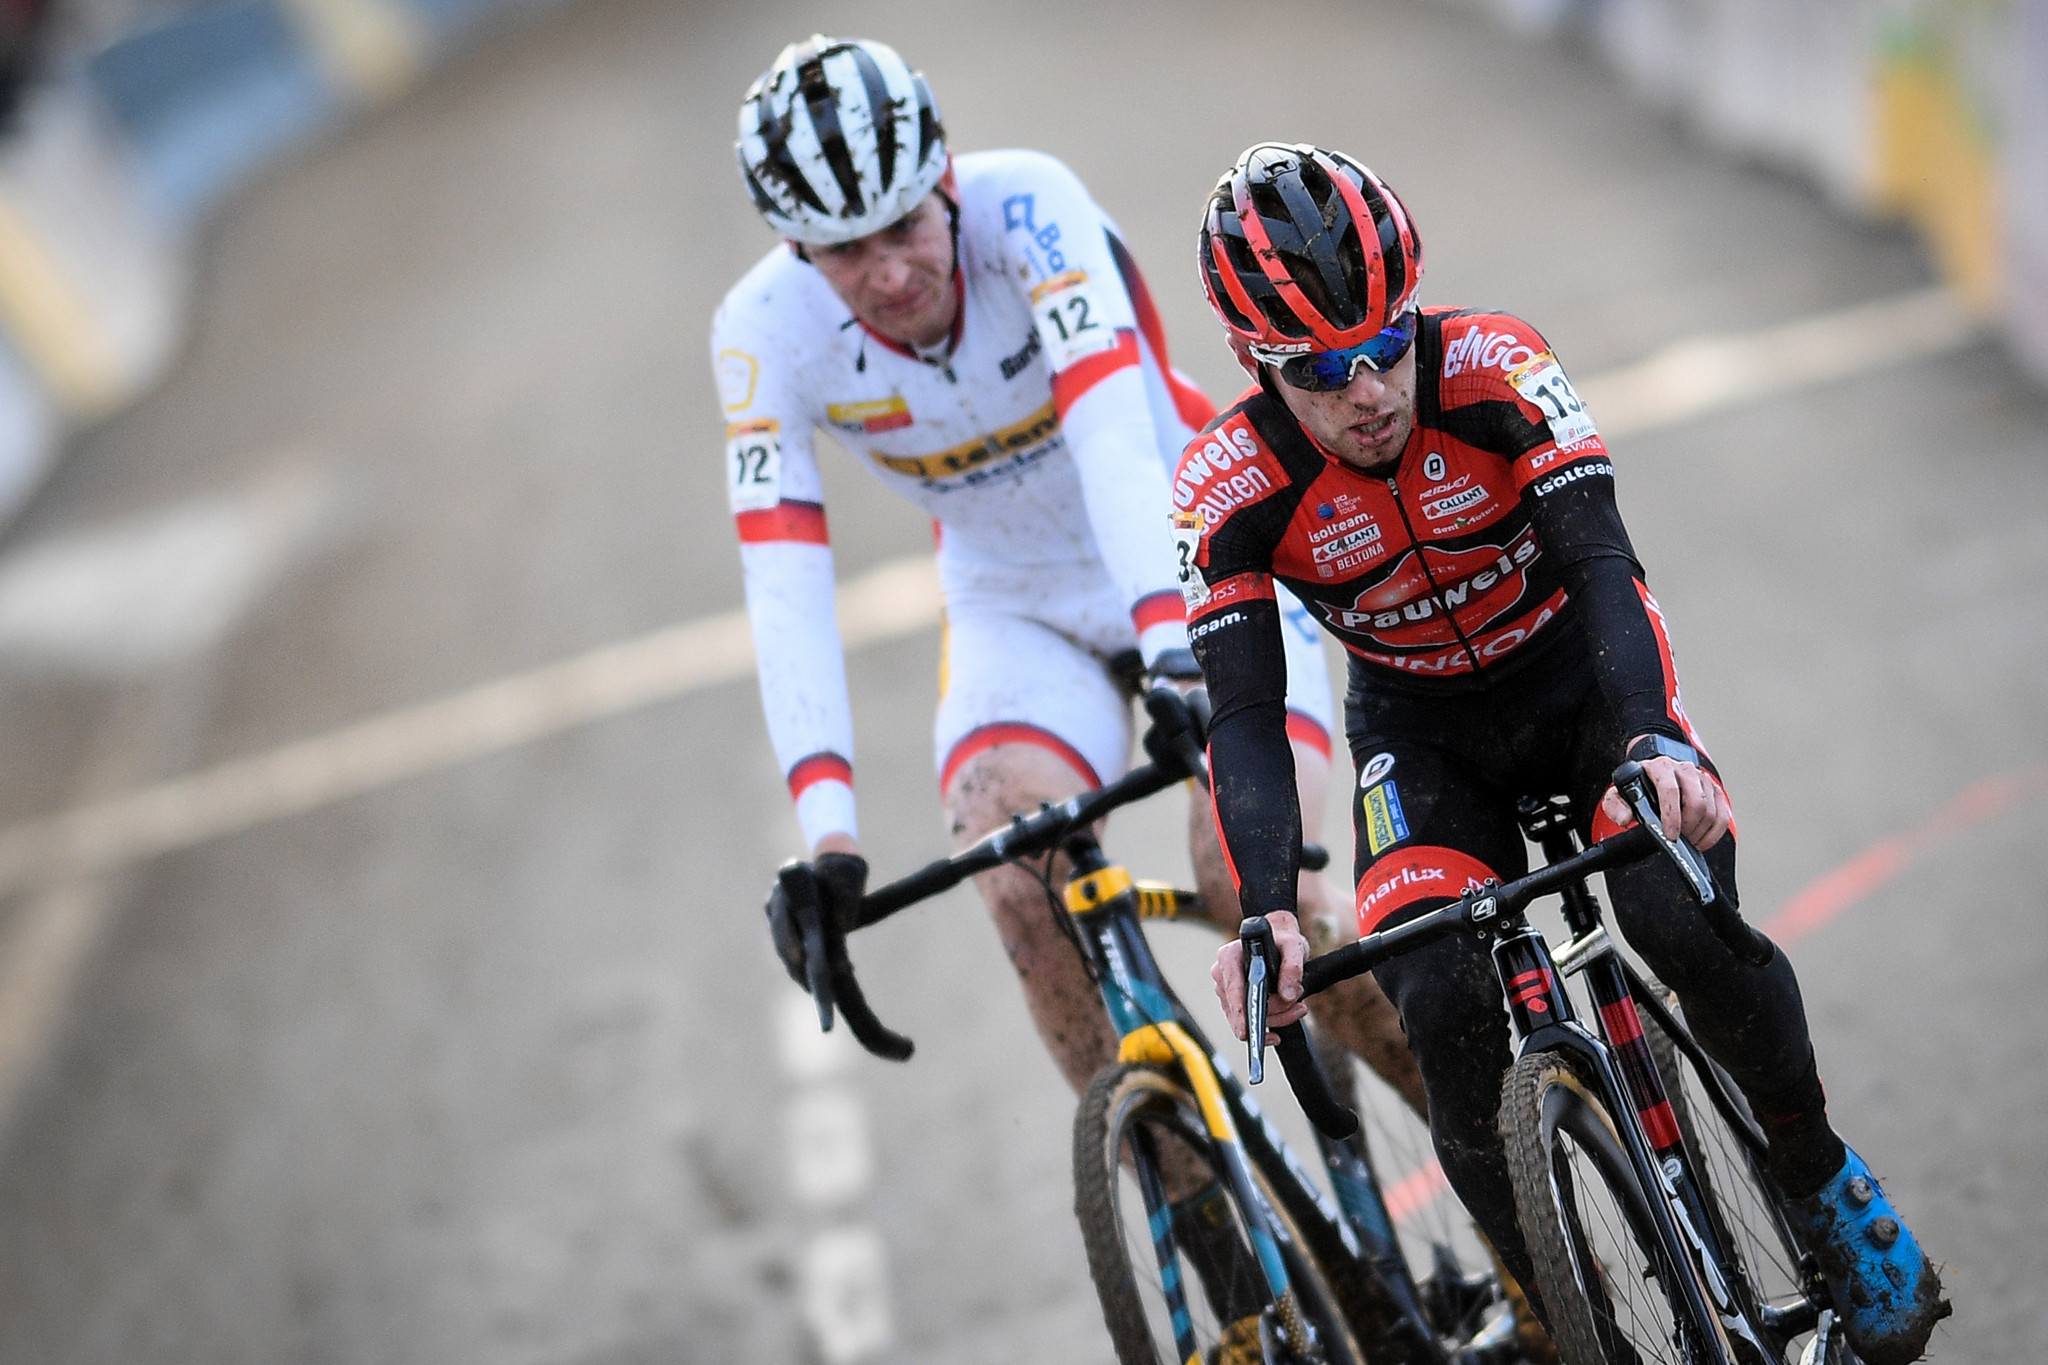 Aerts banking on consistency to retain UCI Cyclo-cross World Cup title 